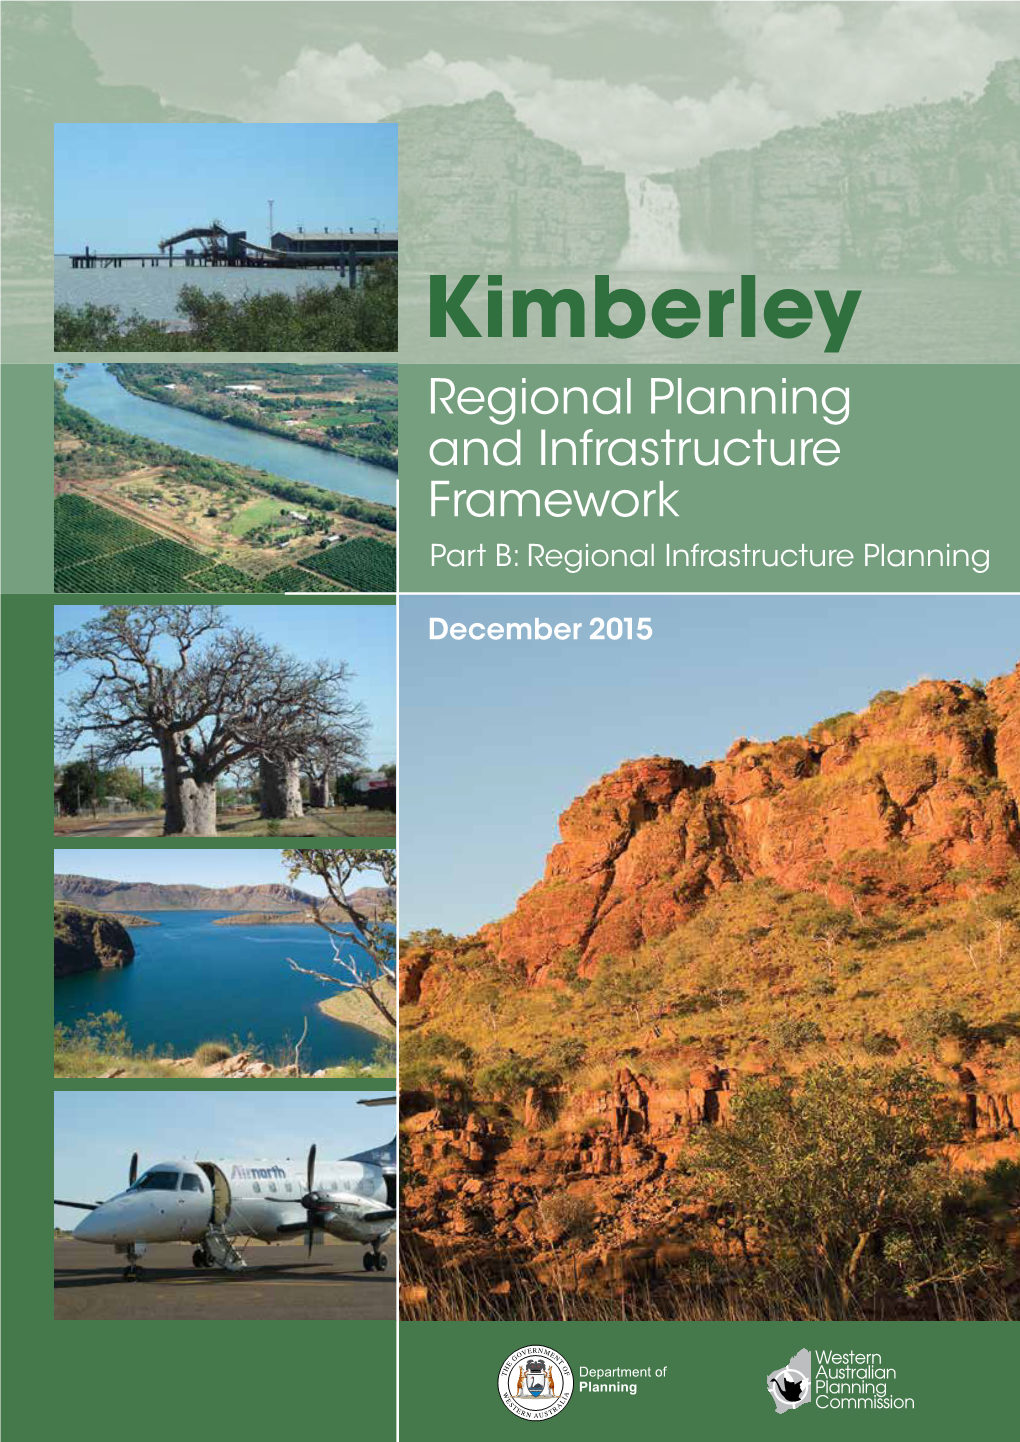 Kimberley Regional Planning and Infrastructure Framework Part B: Regional Infrastructure Planning